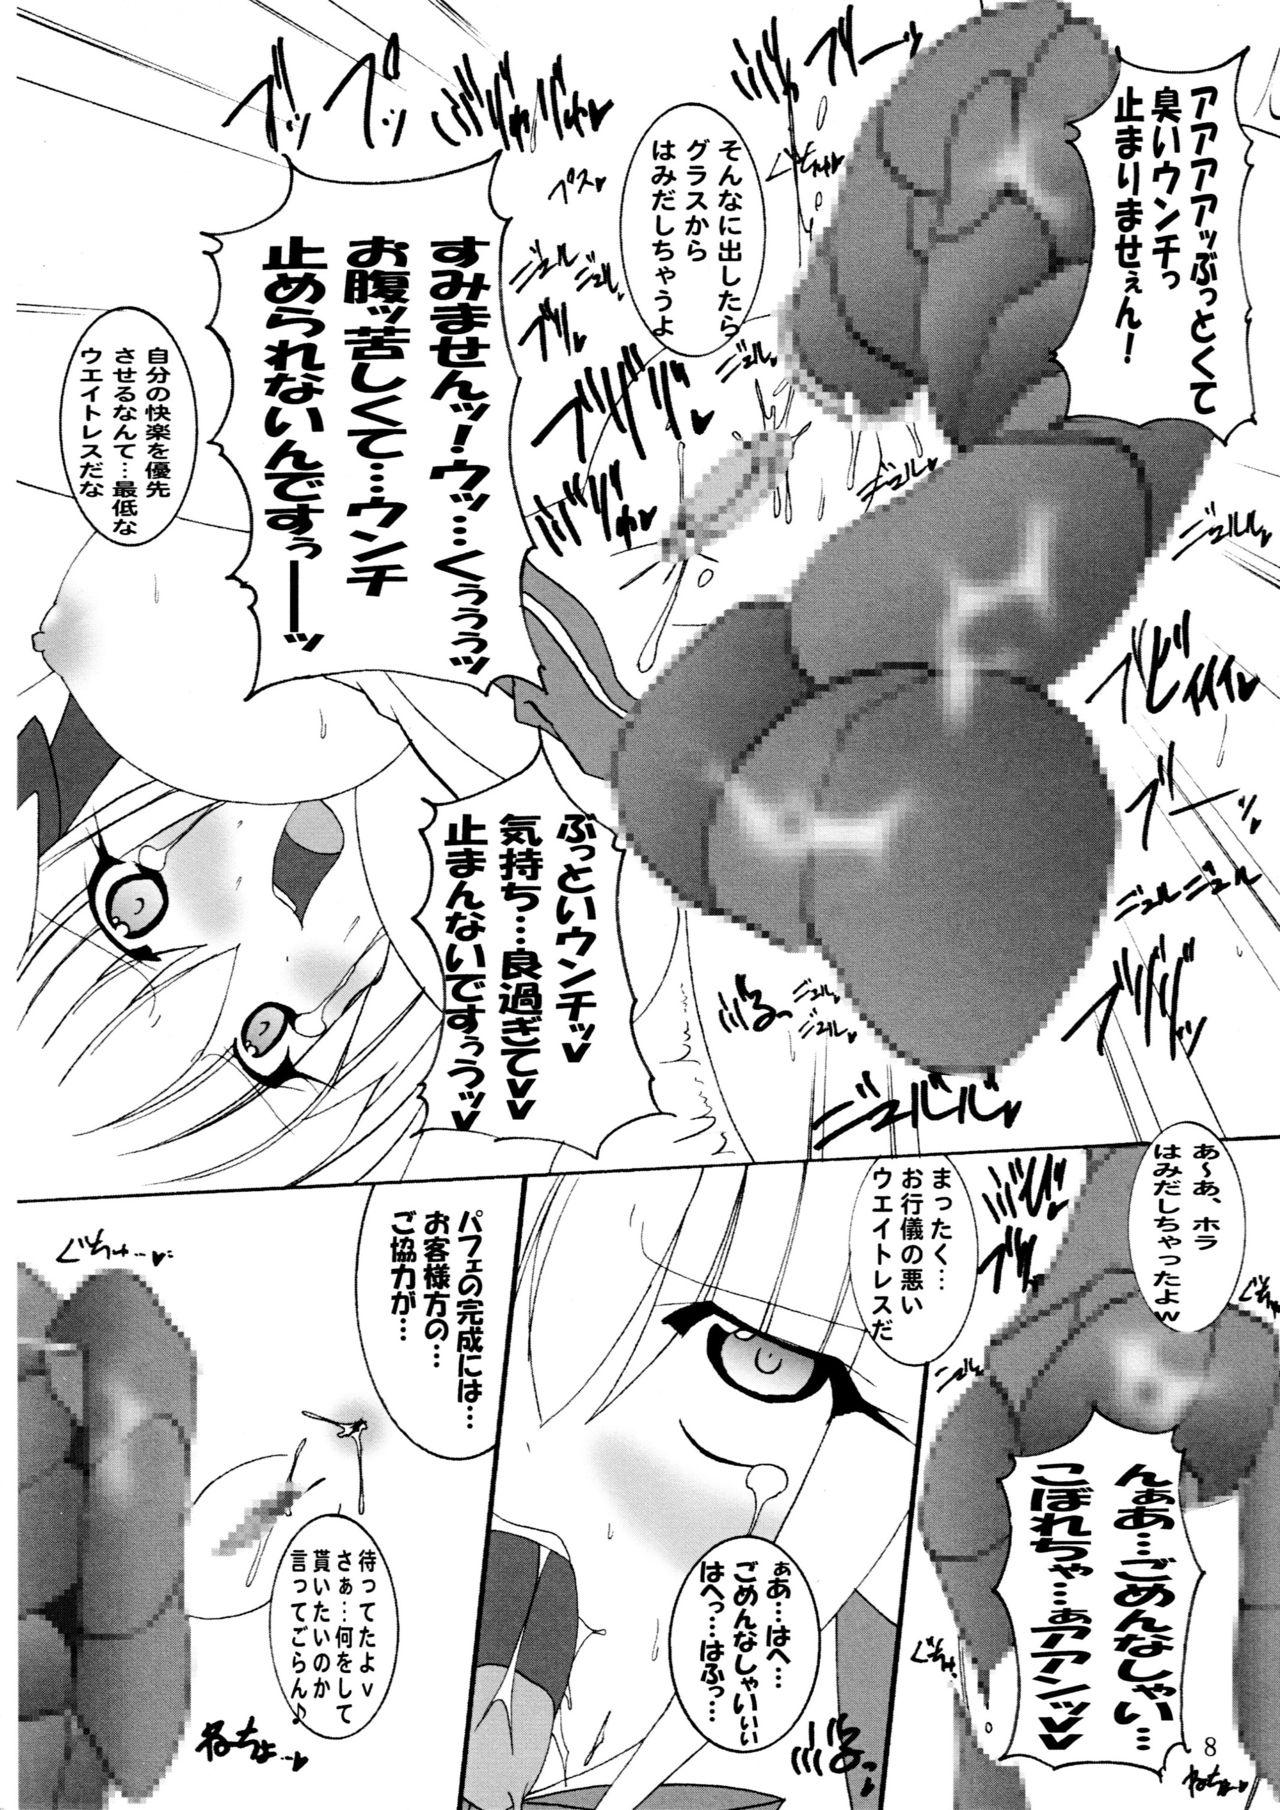 Perverted Hitori Twintail & Abnormal Carnival - Di gi charat Thief - Page 9